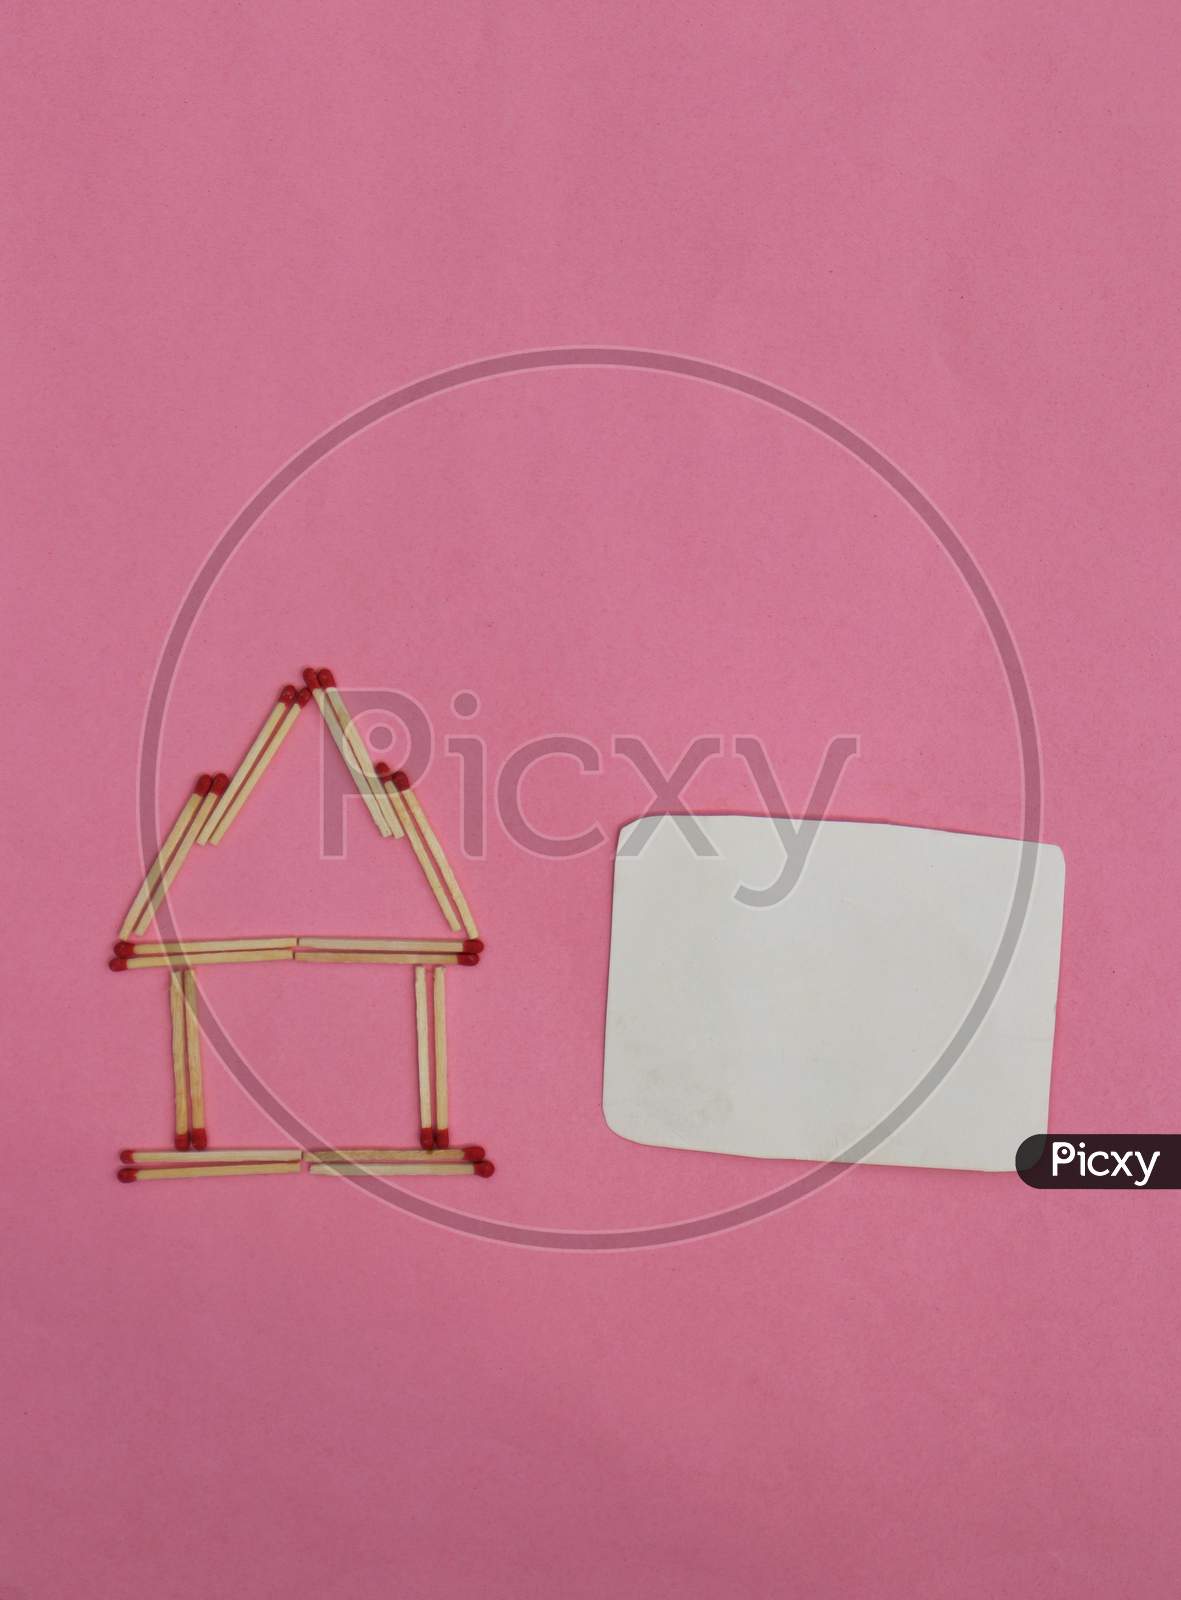 Stay At Home Conceptual Photo With Match Stick Made House With Blank Copy Space For Texts Writing Isolated On Pink Background